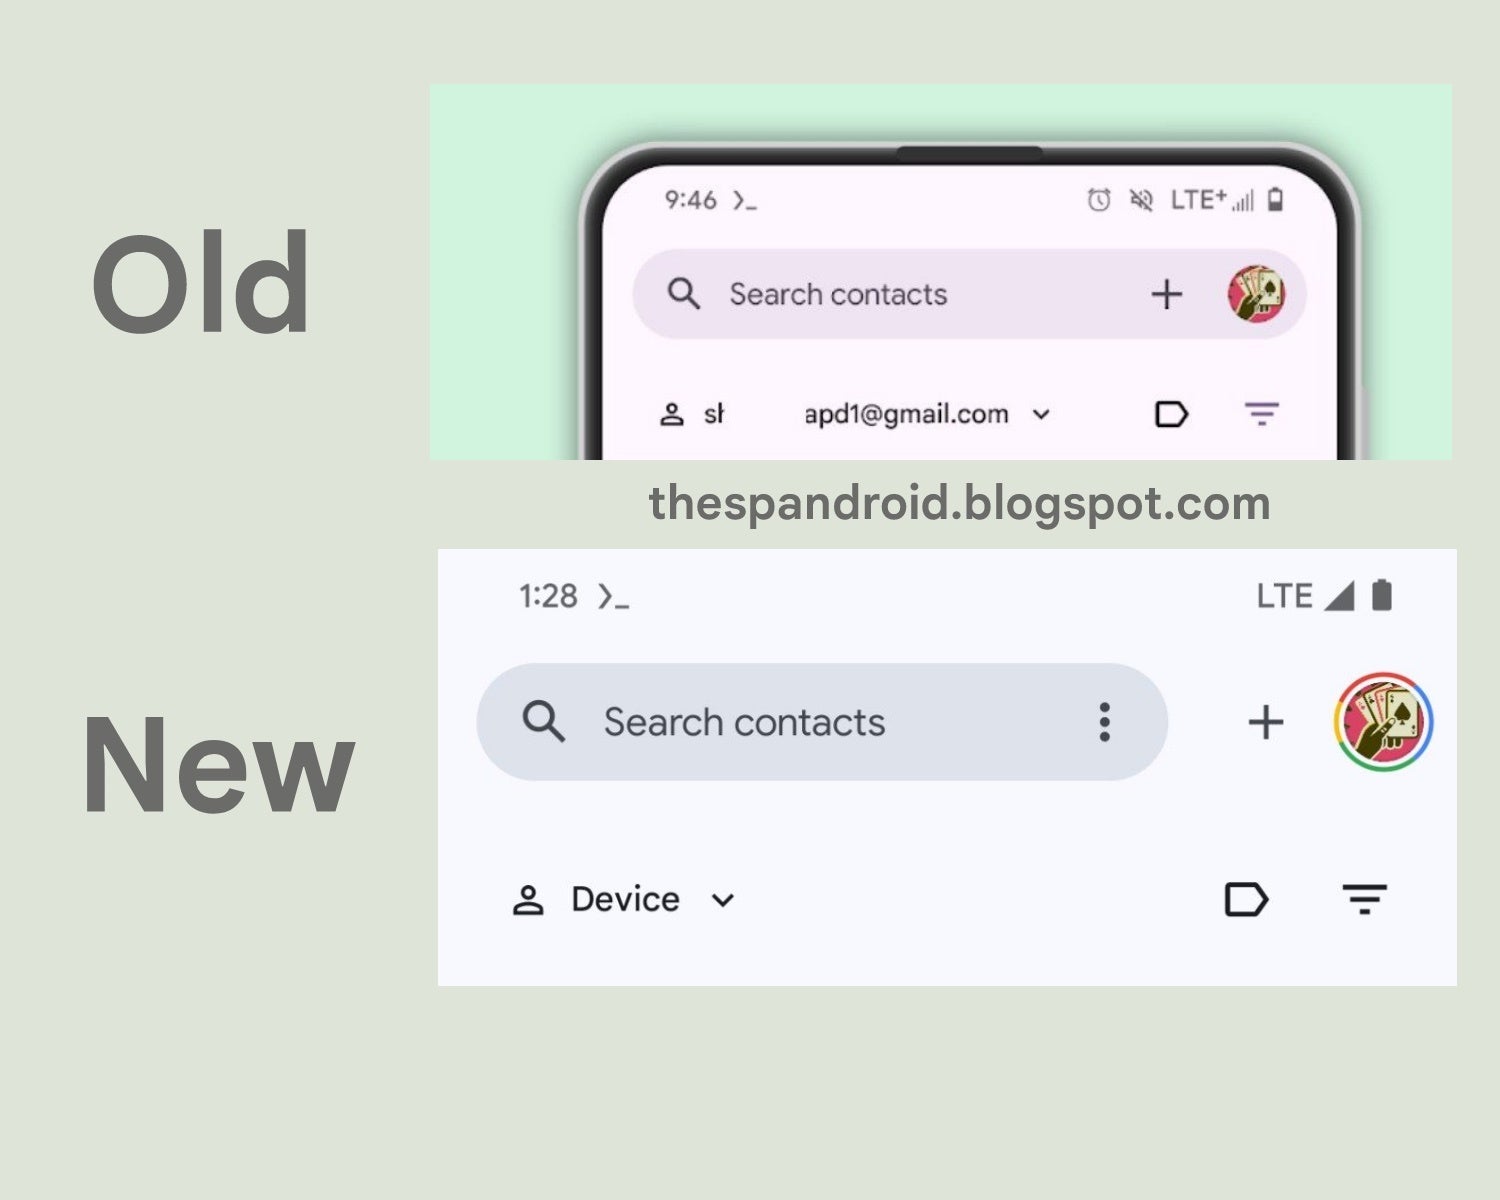 Google is testing a more compact search bar in its native Contacts app